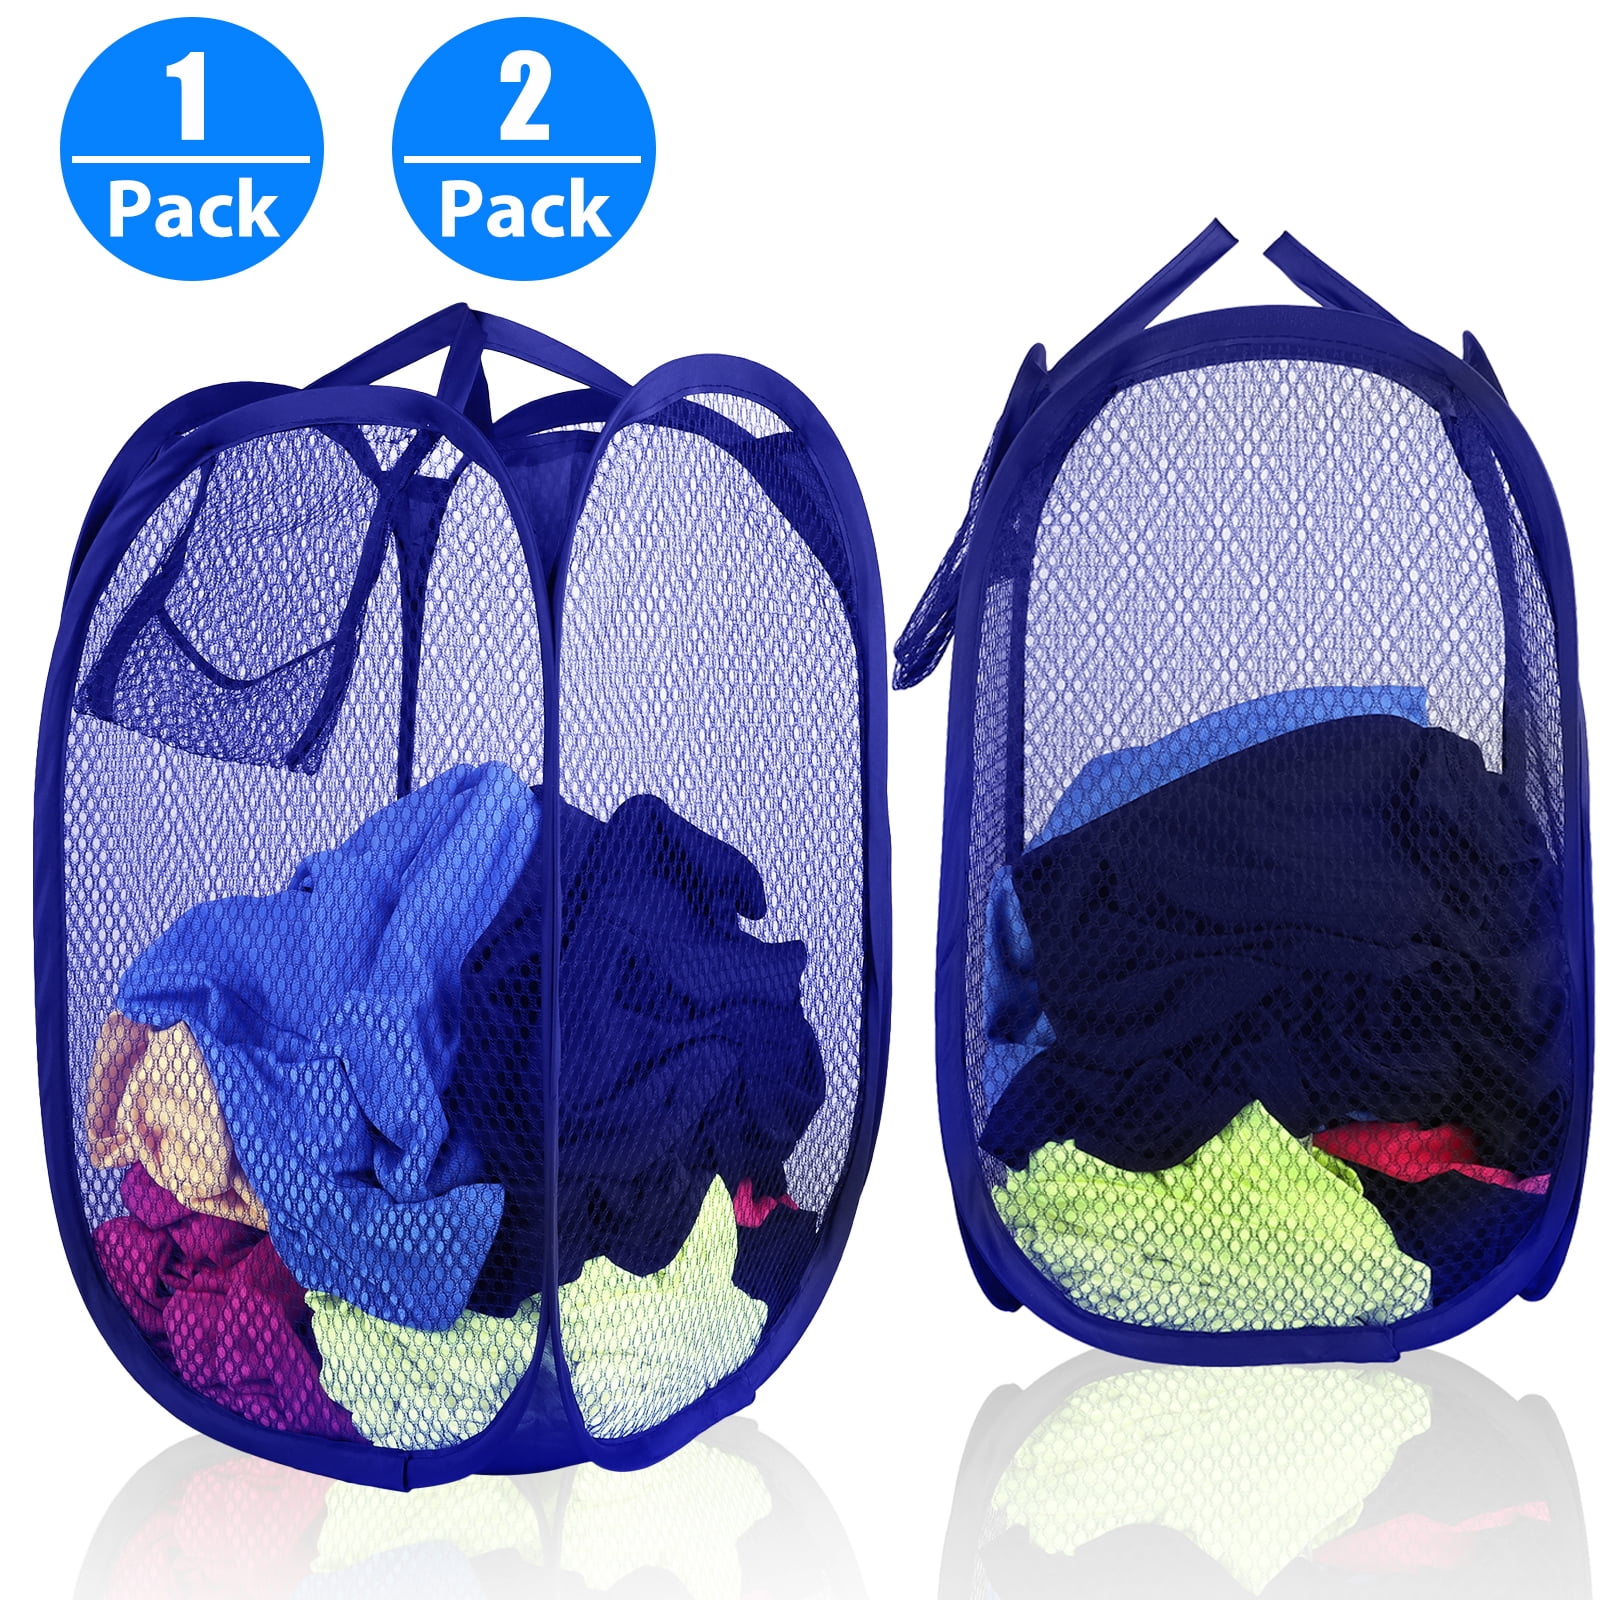 with Portable Black 2 Packs Mesh Pop up Laundry Hamper Collapsible for Storage College Dorm or Travel Foldable Pop-Up Laundry Bags for Kids Room Durable Handles